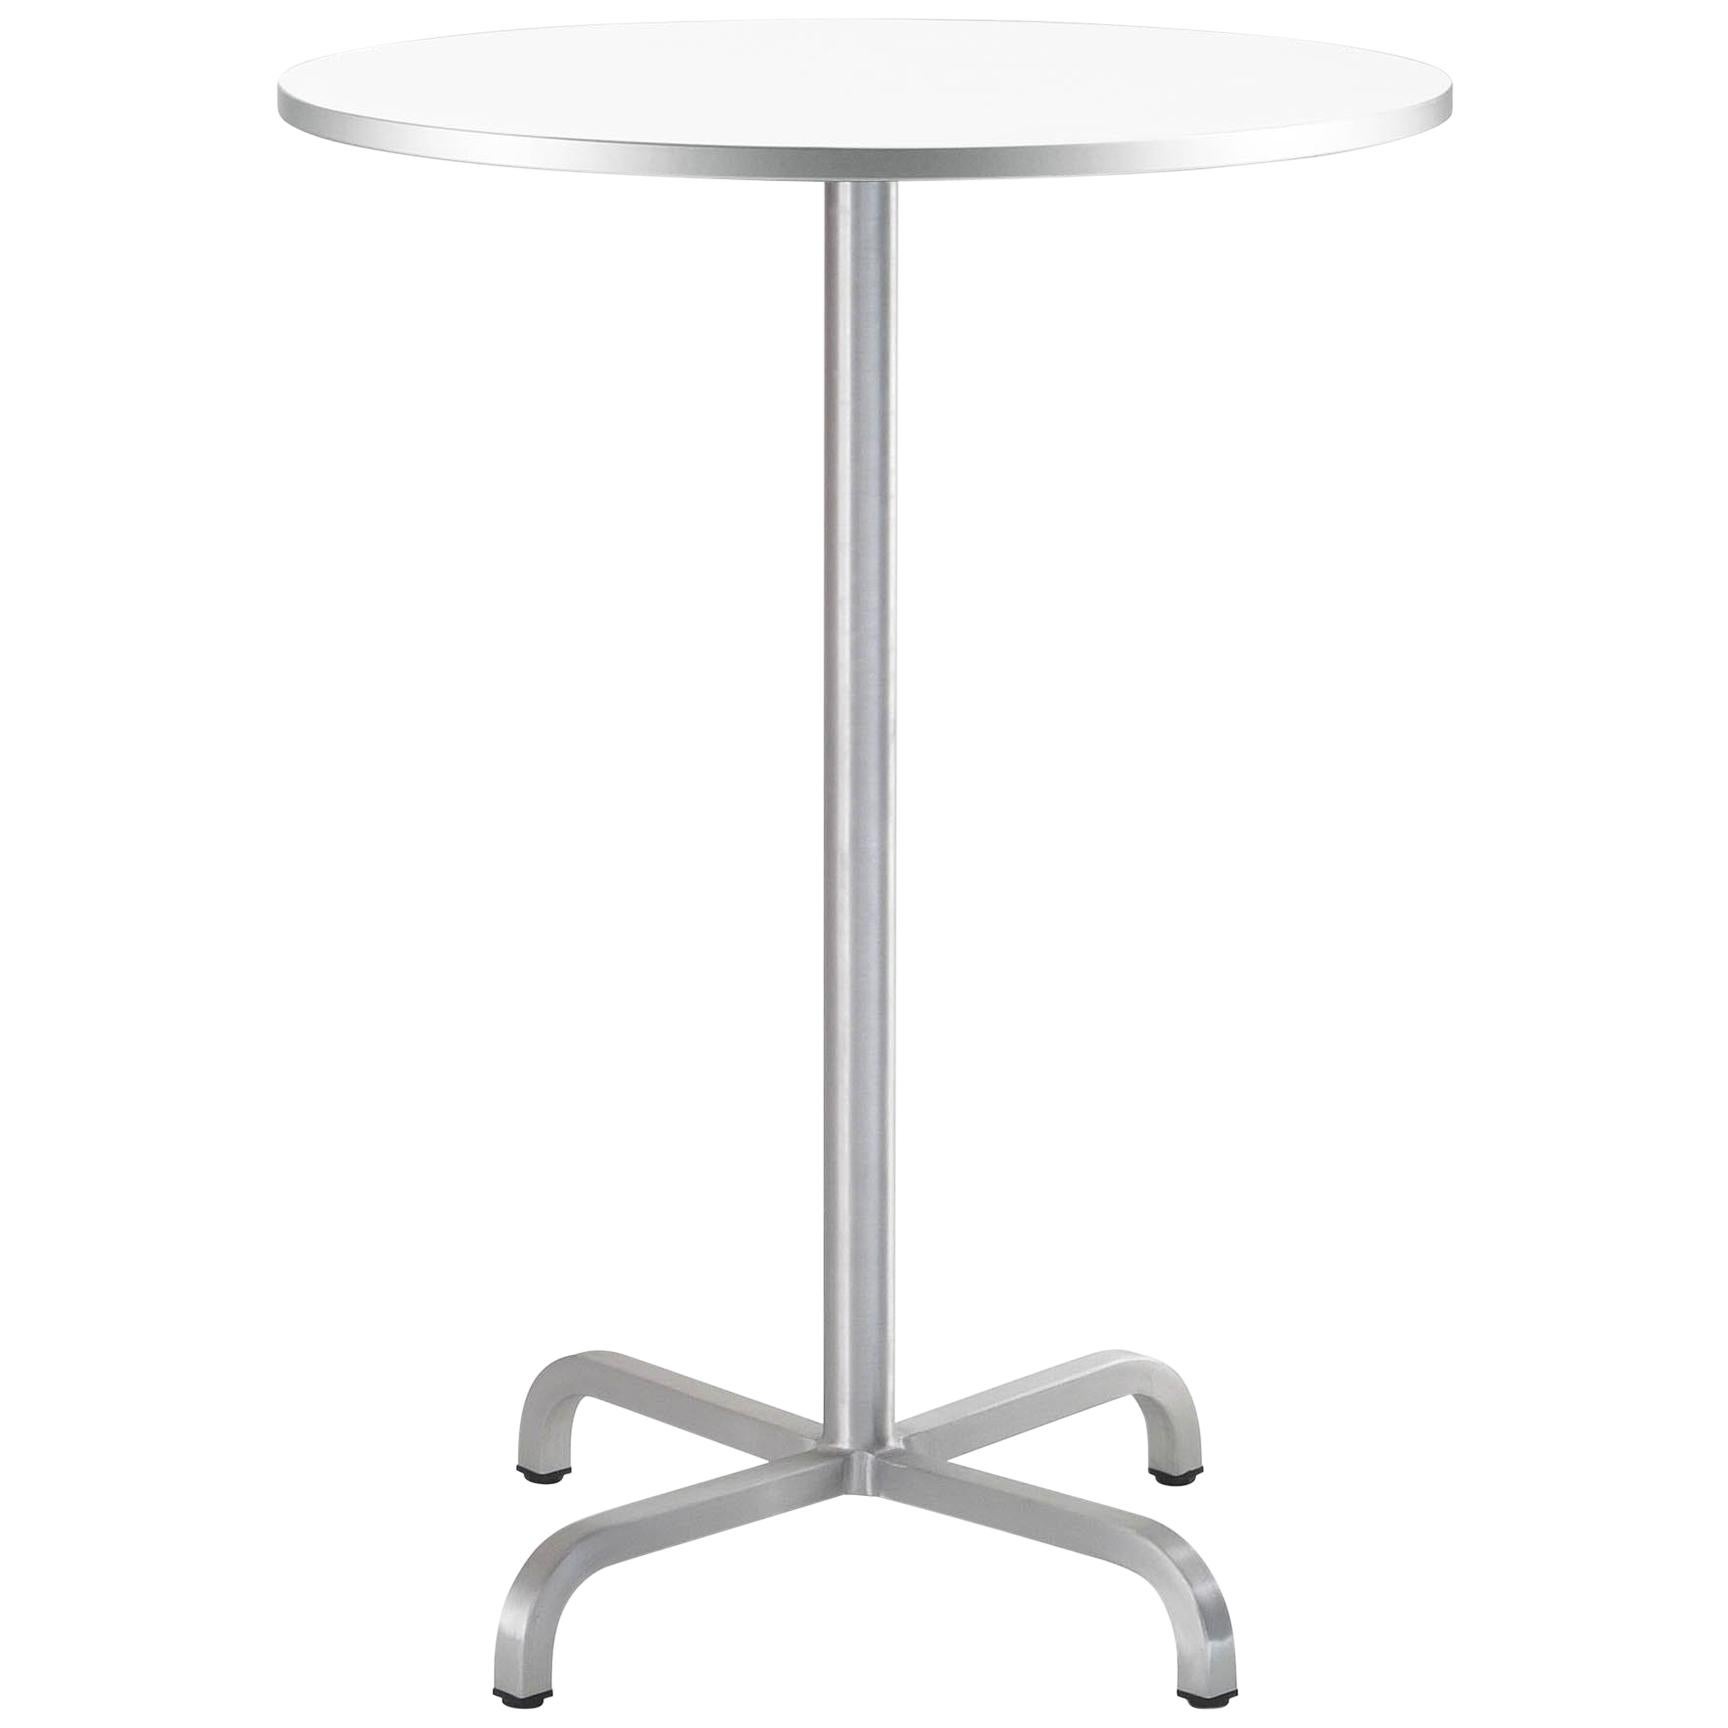 Emeco 20-06 Large Round Bar Table w/ White Laminate Top by Norman Foster 